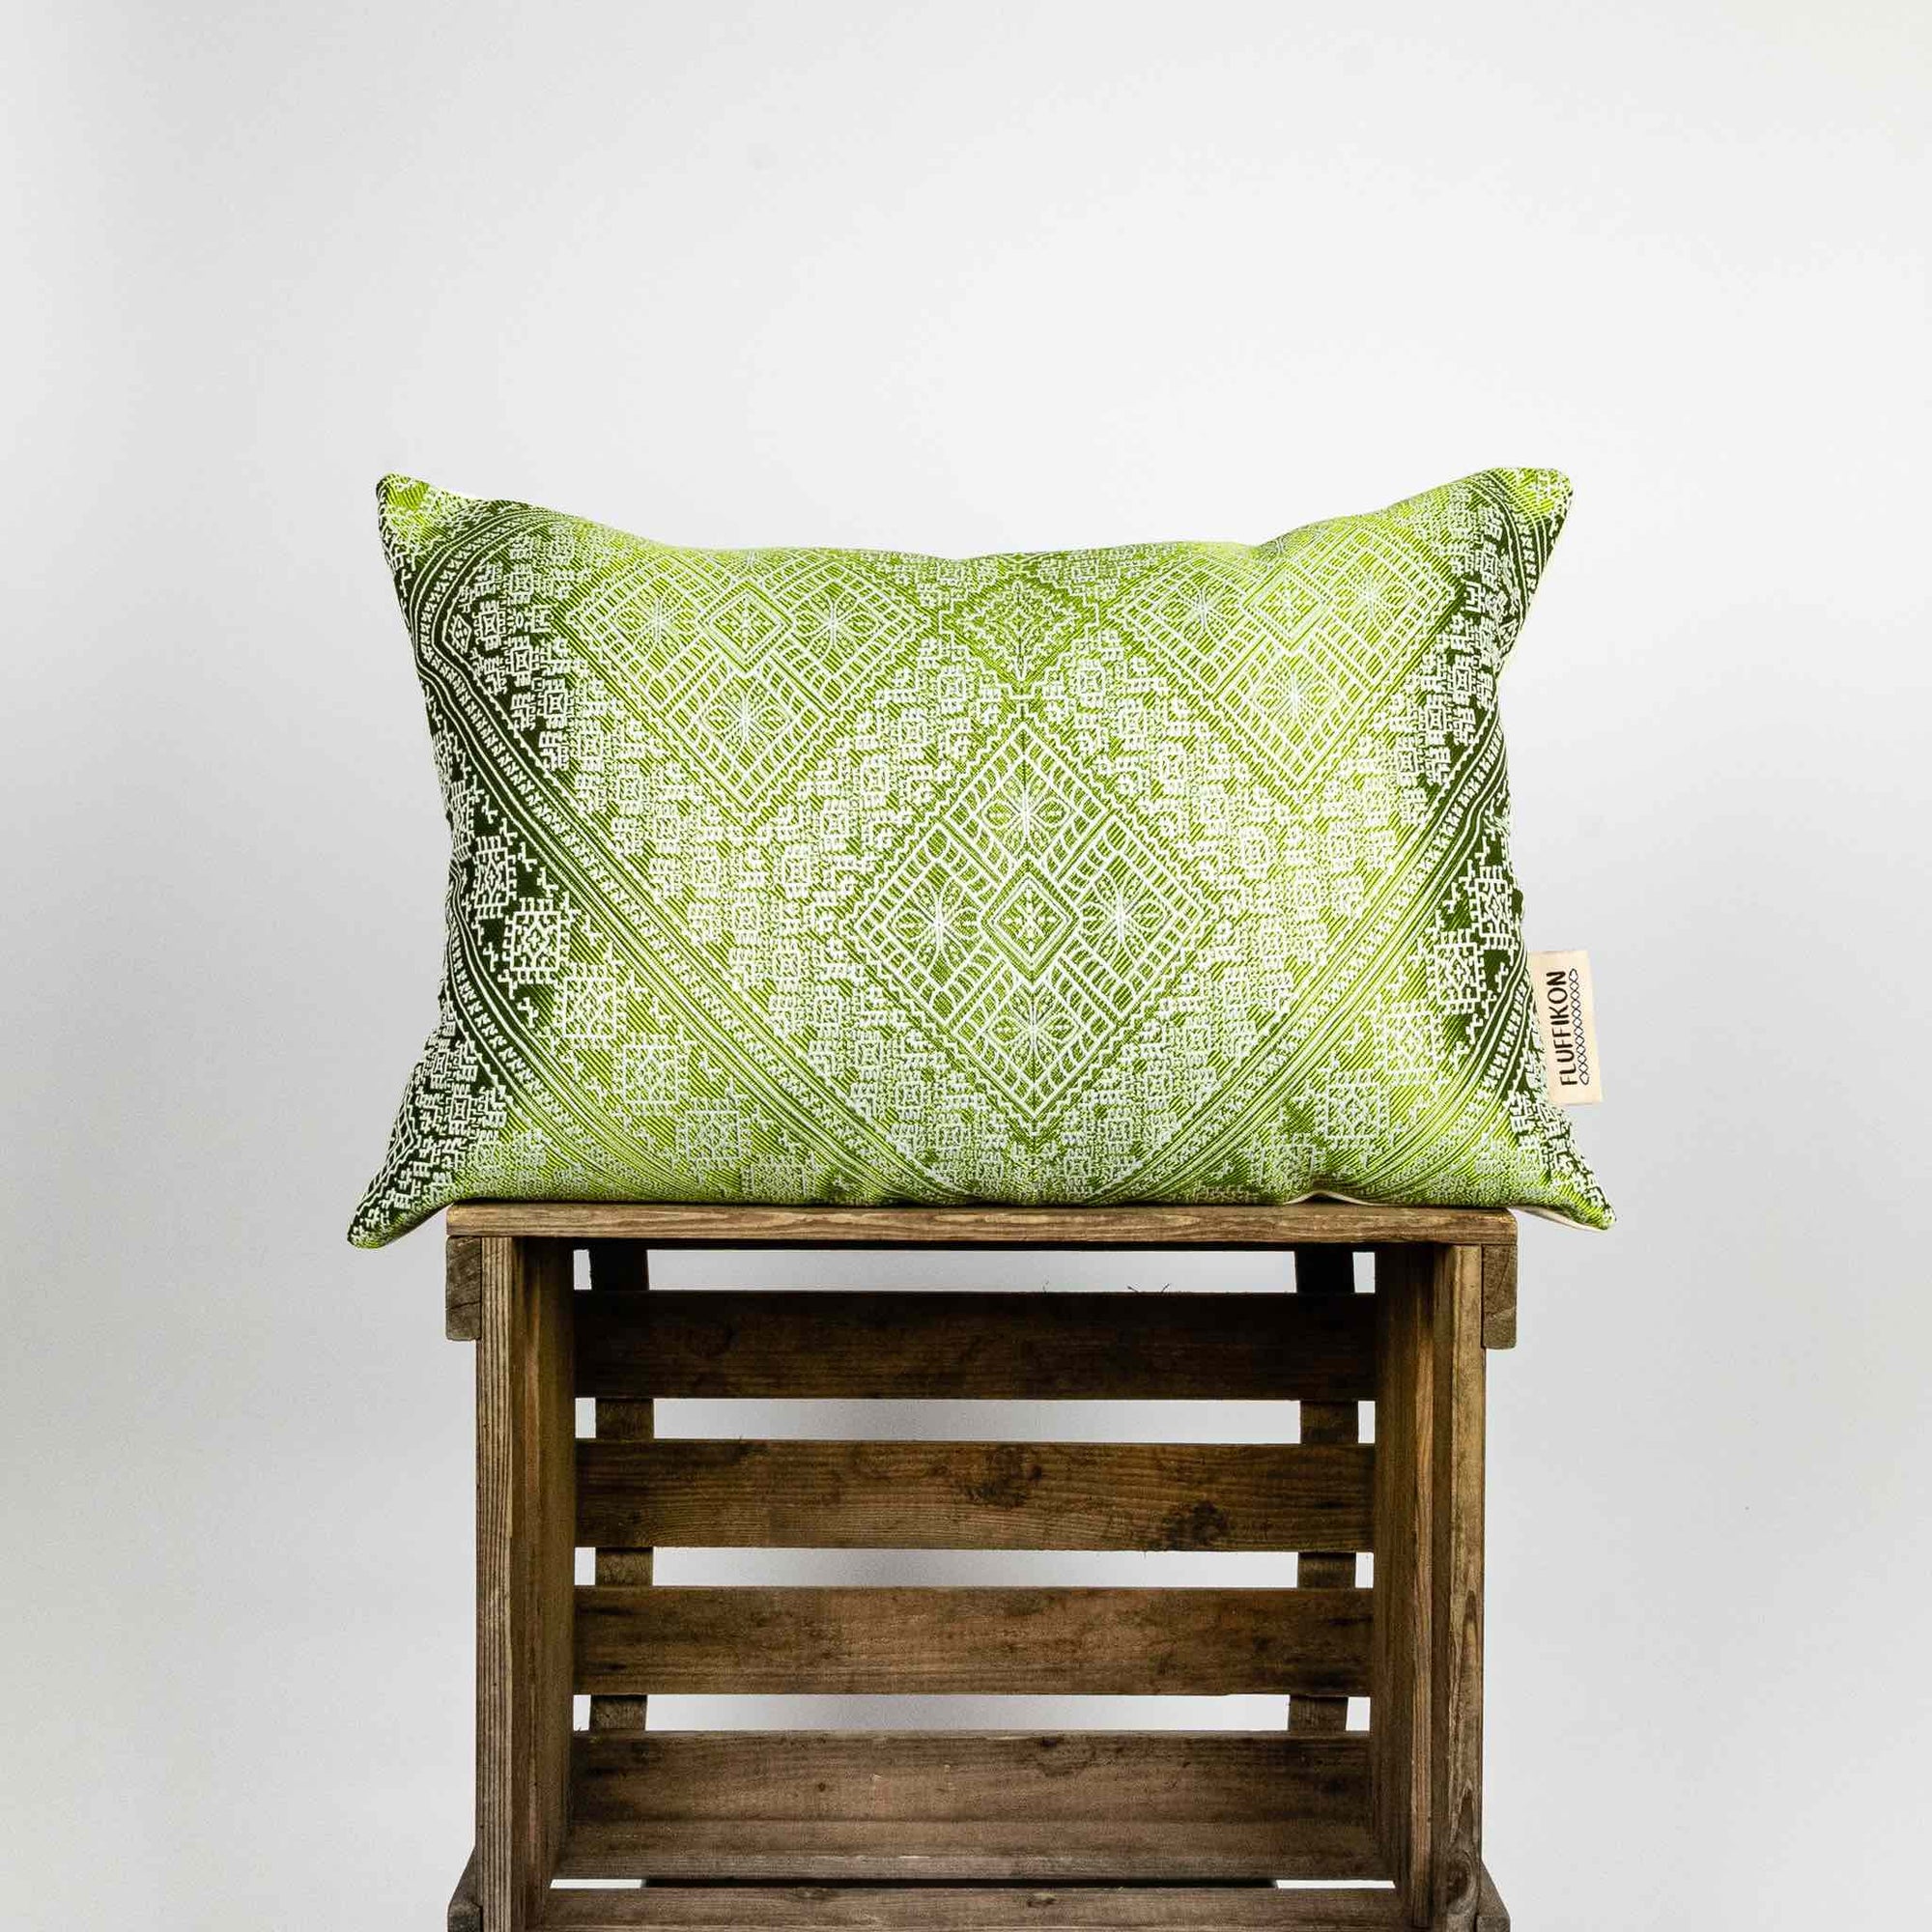 Large decorative pillow made from green moroccan silk fabric. The pillow is on a wooden box. Size 40x60 cm.